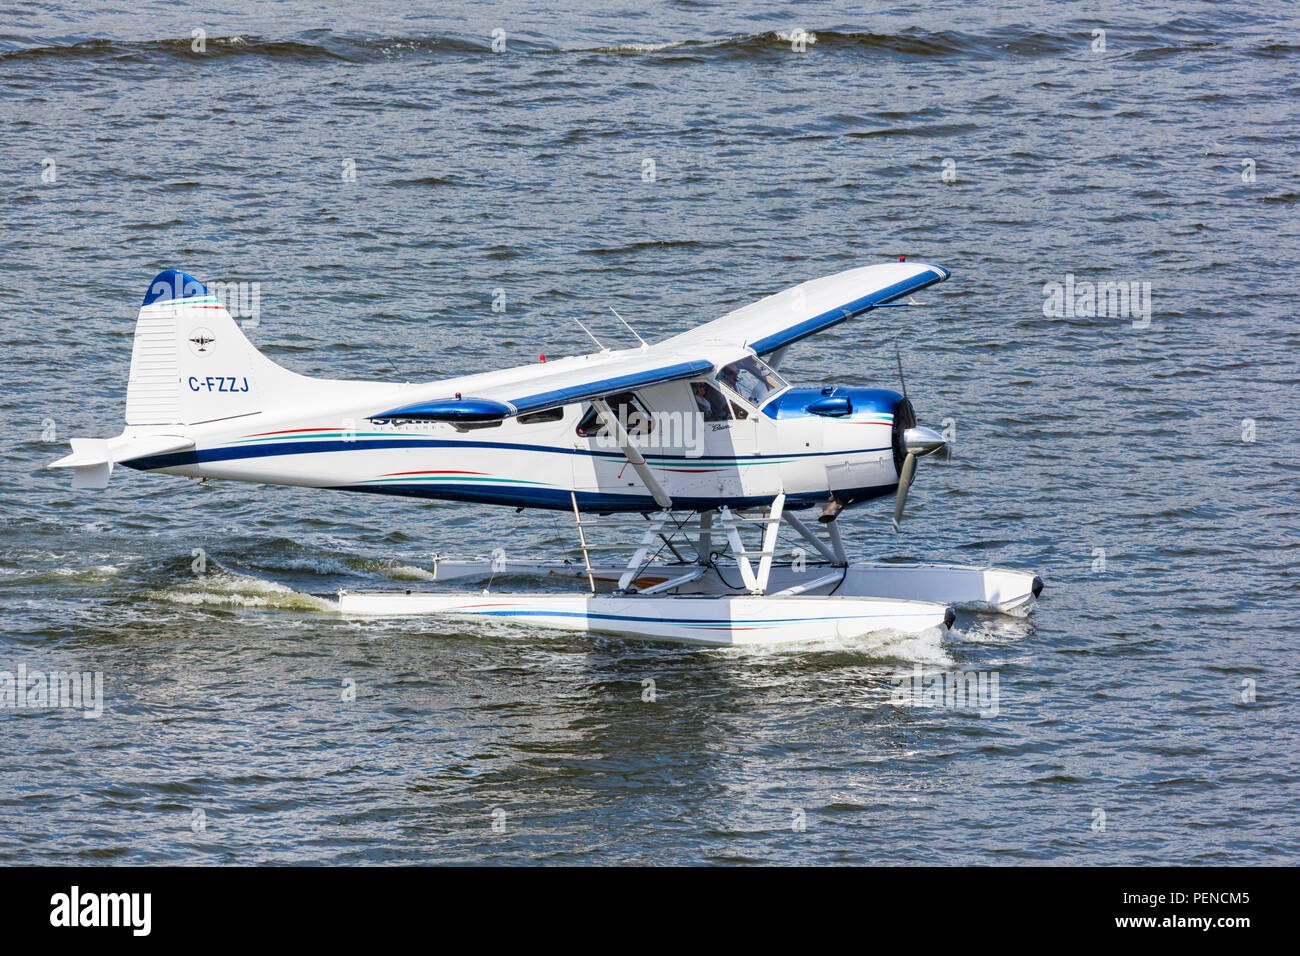 Seaplane C-FZZJ, a De Havilland DHC-2 Beaver Mk.1, taking tourists for a pleasure flight from the harbour at Vancouver, British Columbia, Canada Stock Photo